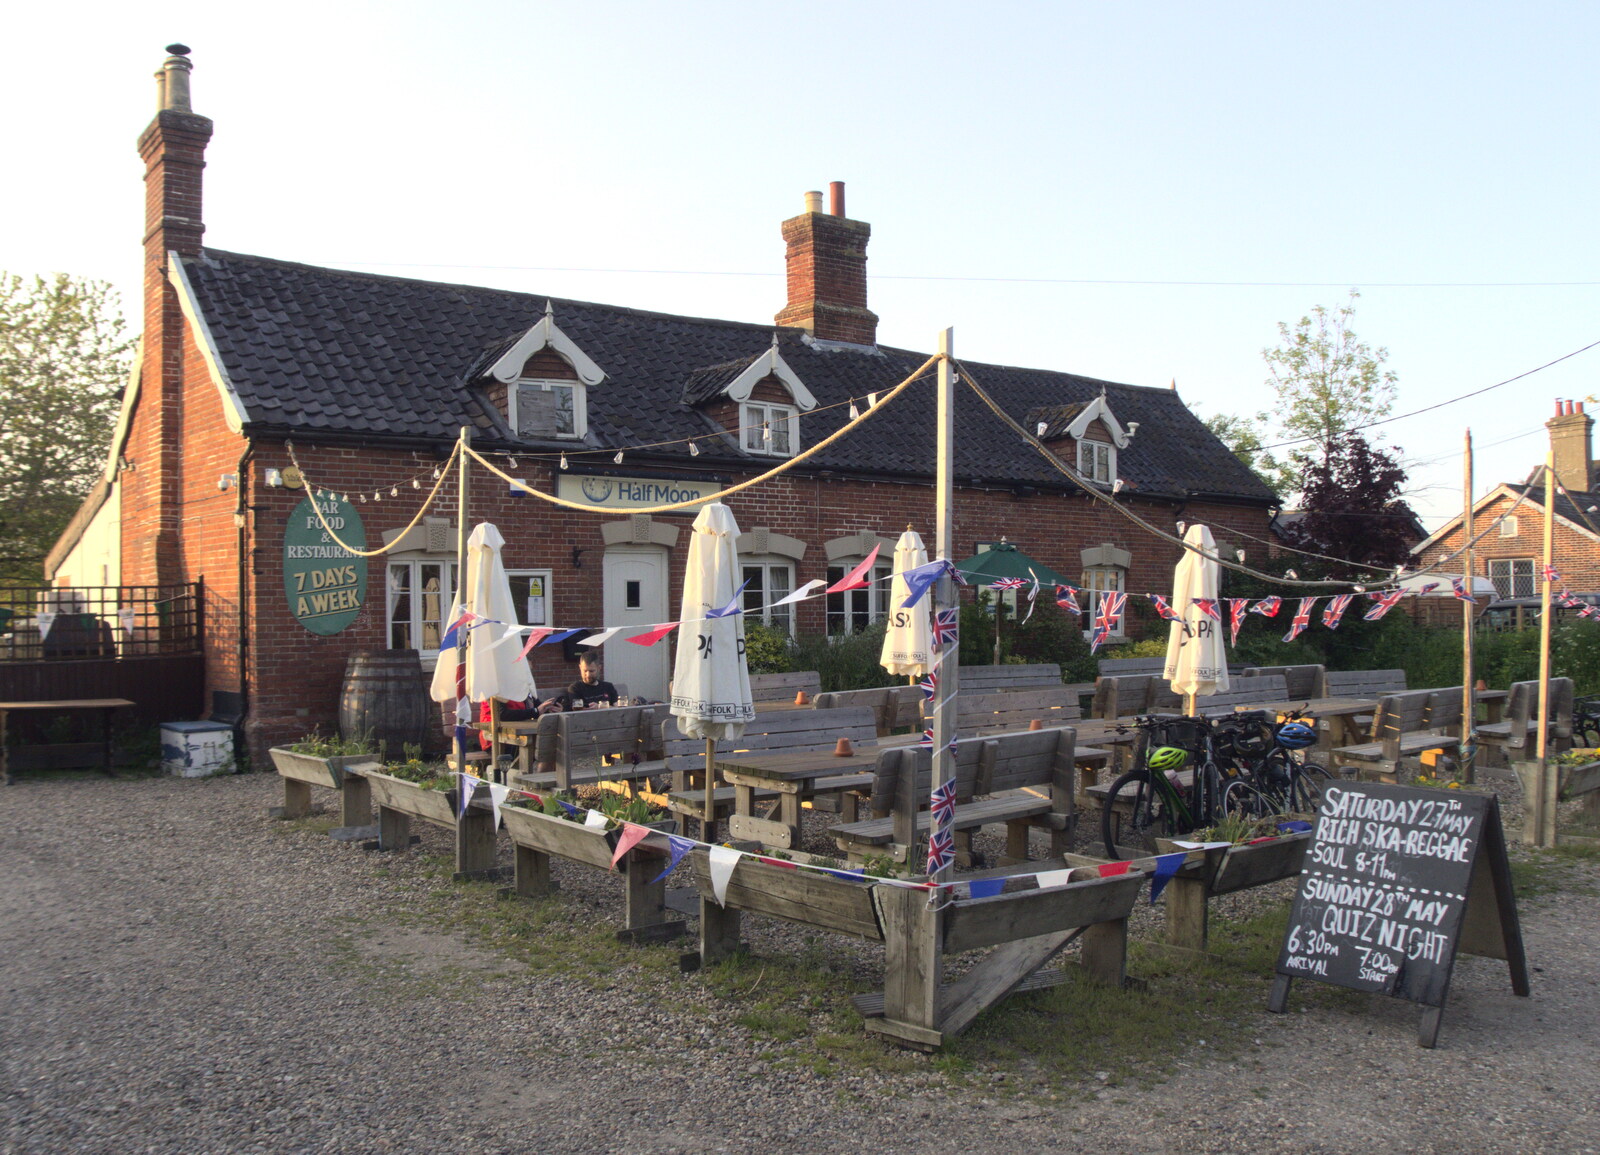 The Community-run Half Moon pub from The BSCC at Rushall, South Lopham and Redgrave - 25th May 2023